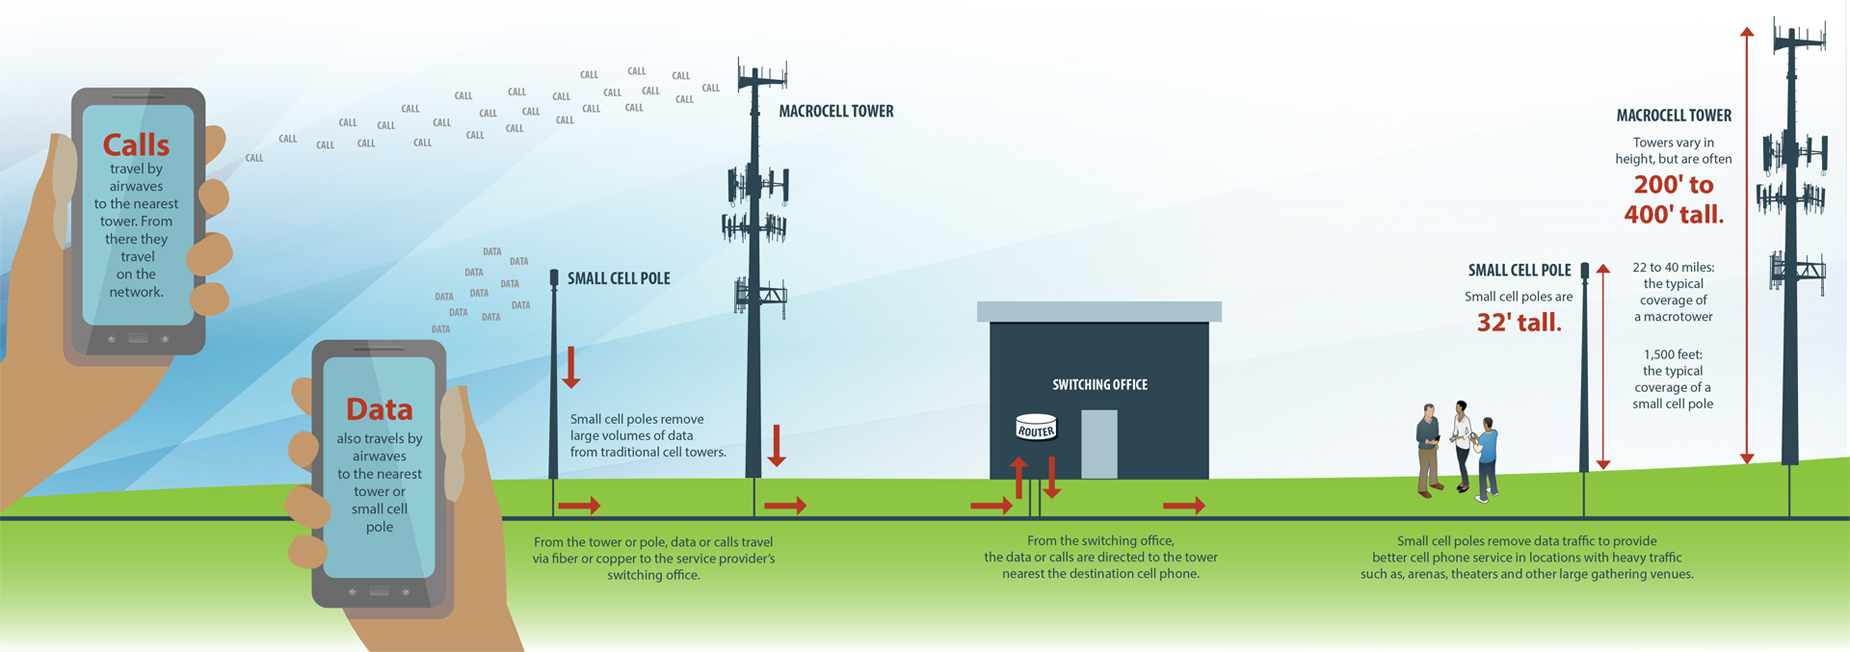 Informational graphic comparing small cell poles and macrocell towers